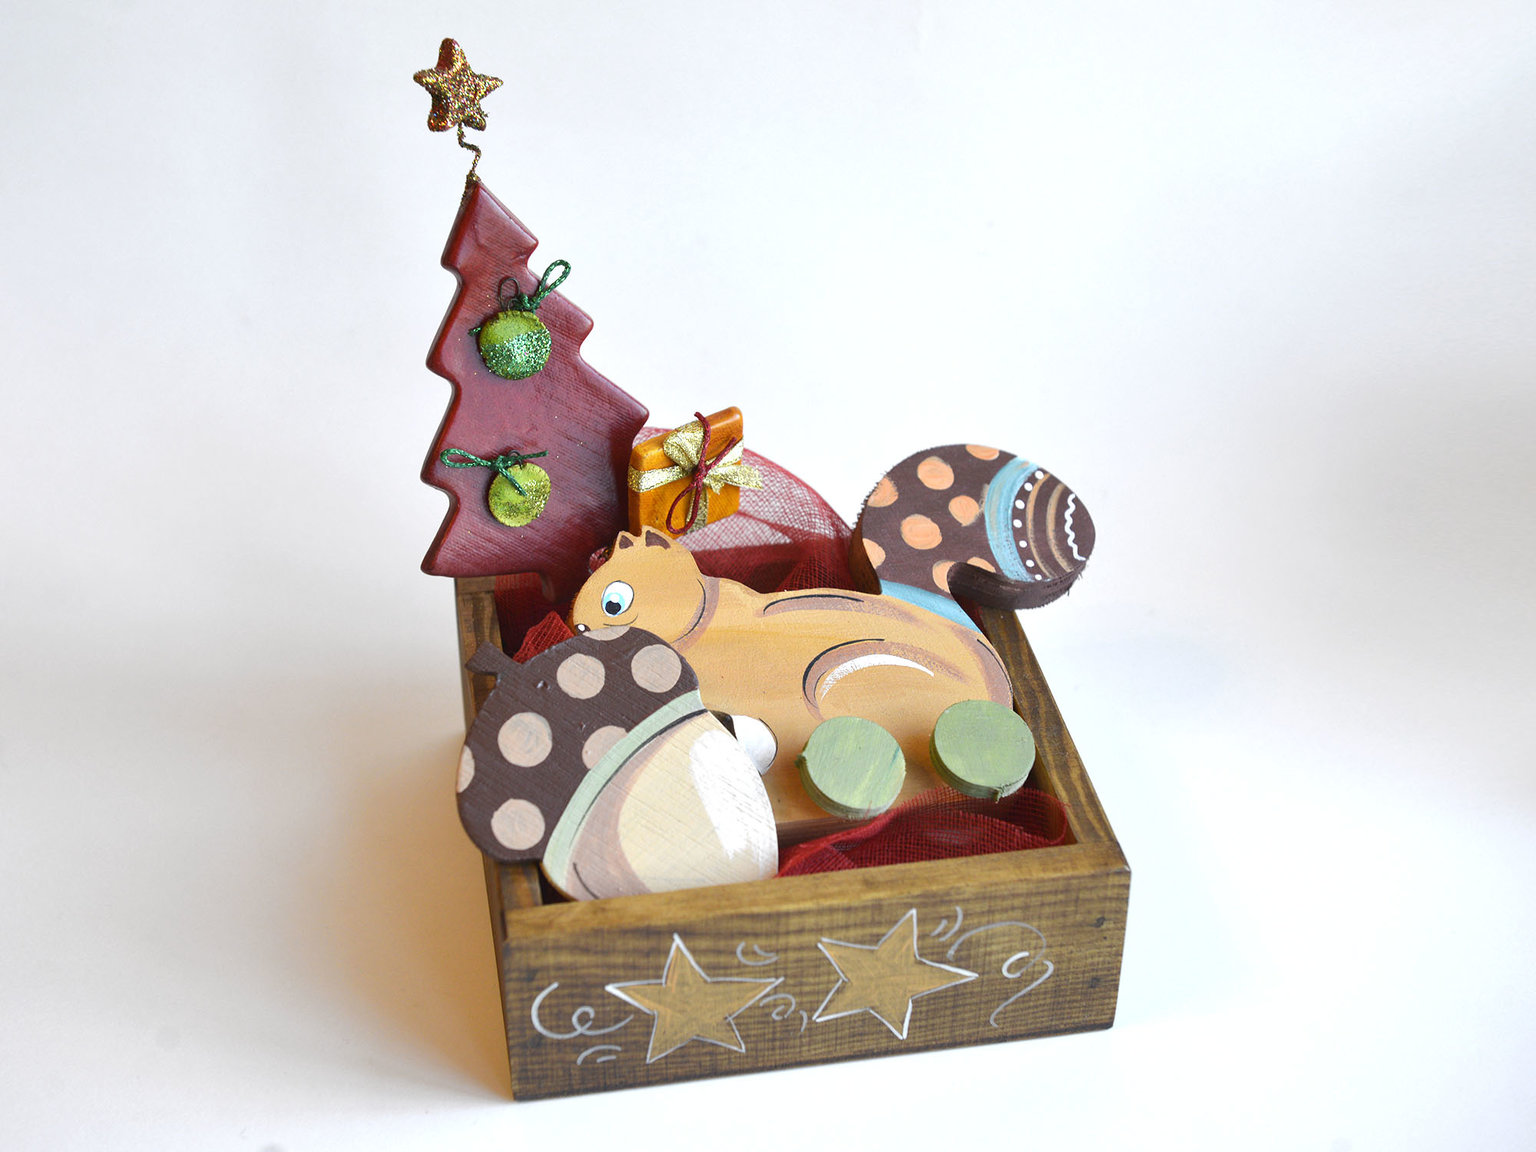 Gift set: "A squirrel, an acorn and a Christmas tree"